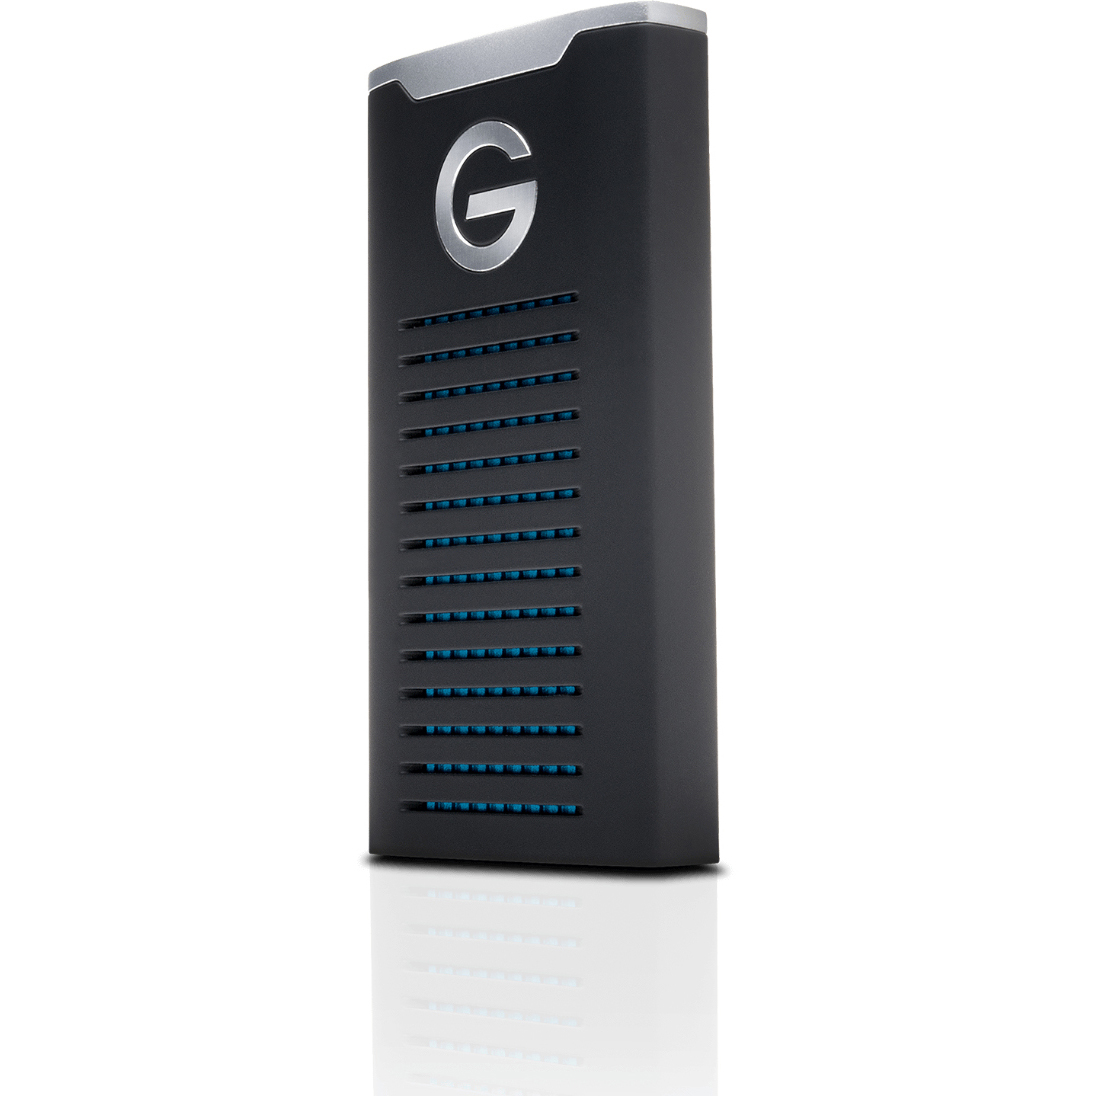 Original G-Technology G-DRIVE Mobile 500GB External Solid State Drive (0G06052-1)